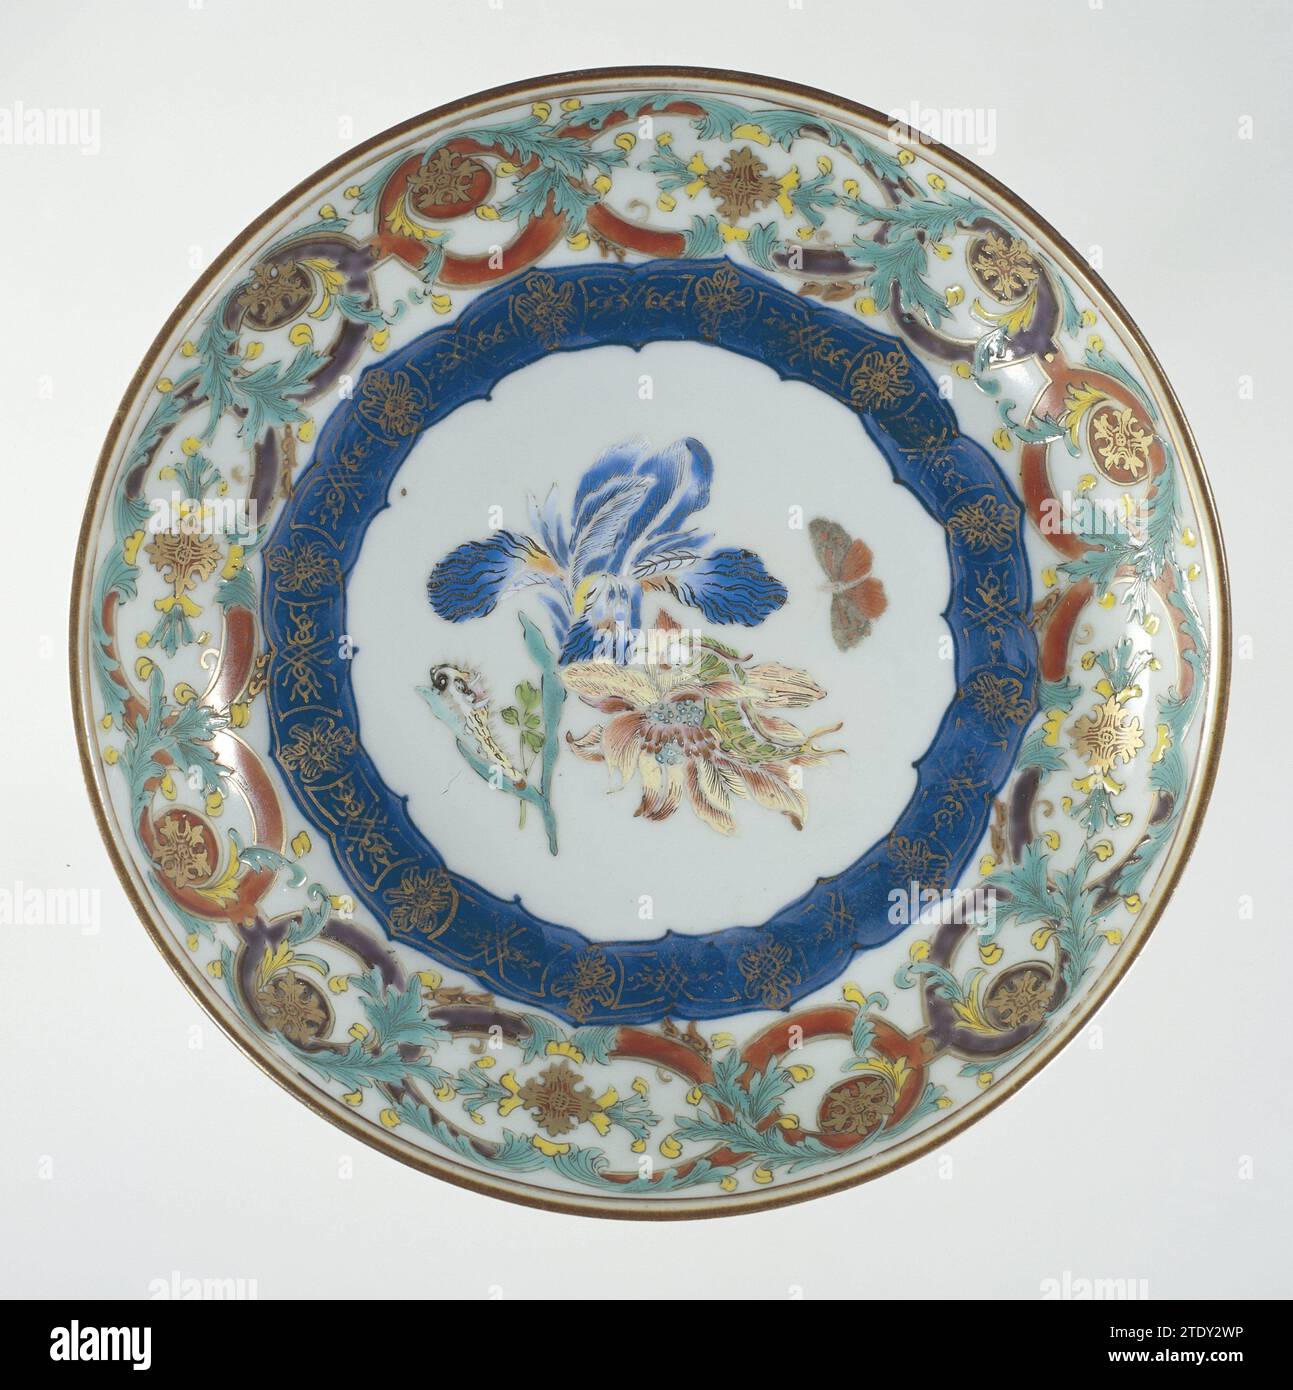 Saucer-dish with flowers, butterfly and ornamental borders, anonymous, c. 1740 - c. 1750 Scale of porcelain with round wall, painted in underly glaze blue and on the glaze in blue, red, pink, green, yellow, black and gold. On the flat two flower branches (iris, anemone) on which two caterpillars, next to it a flying butterfly; Around this a decorative tire in underly glaze blue with gold; the wall a band with a connected pattern with leaf vines; The outer edge with a tire servetwork. European performance in email colors. China porcelain. glaze. cobalt (mineral). gold (metal) painting / gilding Stock Photo